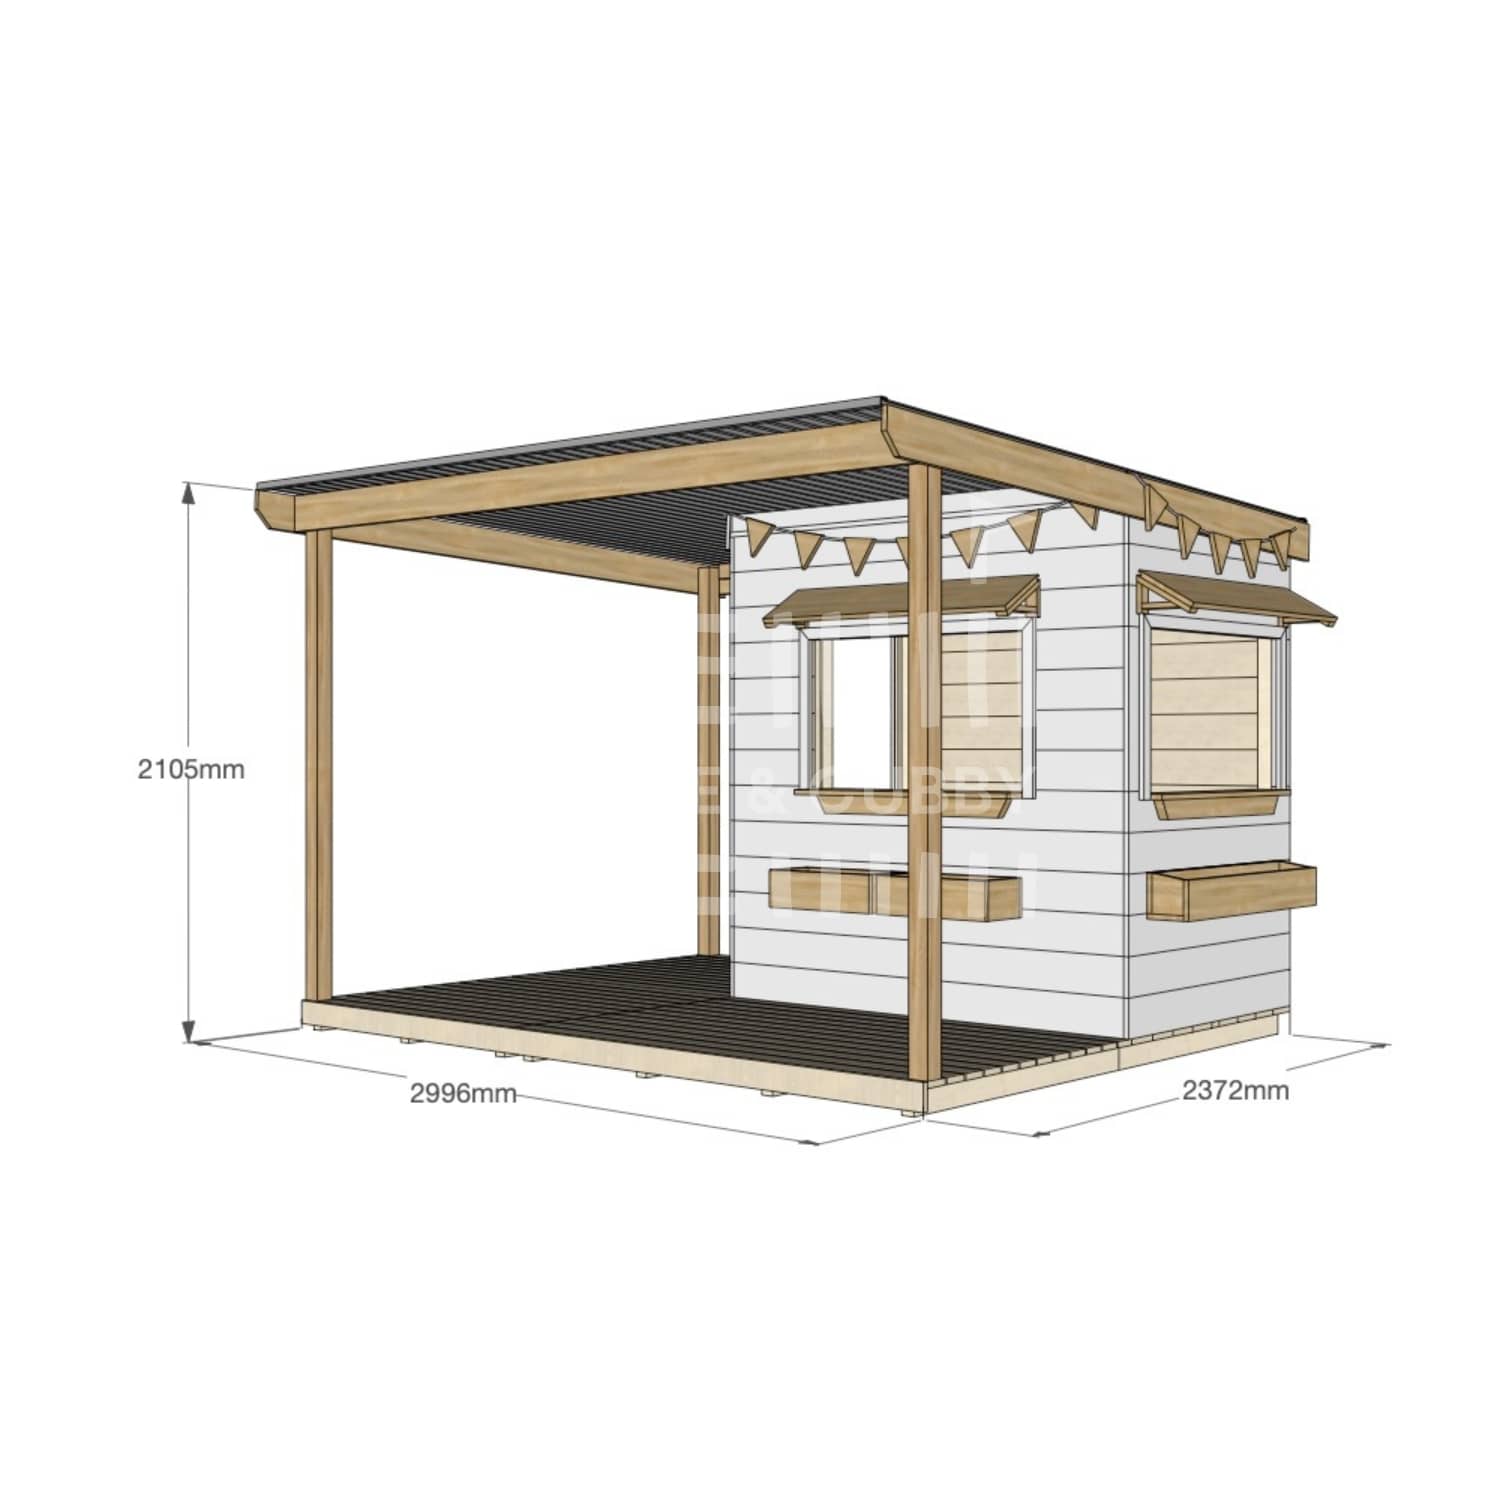 Commercial grade extended height painted little rectangle pine timber cubby house with wraparound verandah, accessories and dimensions